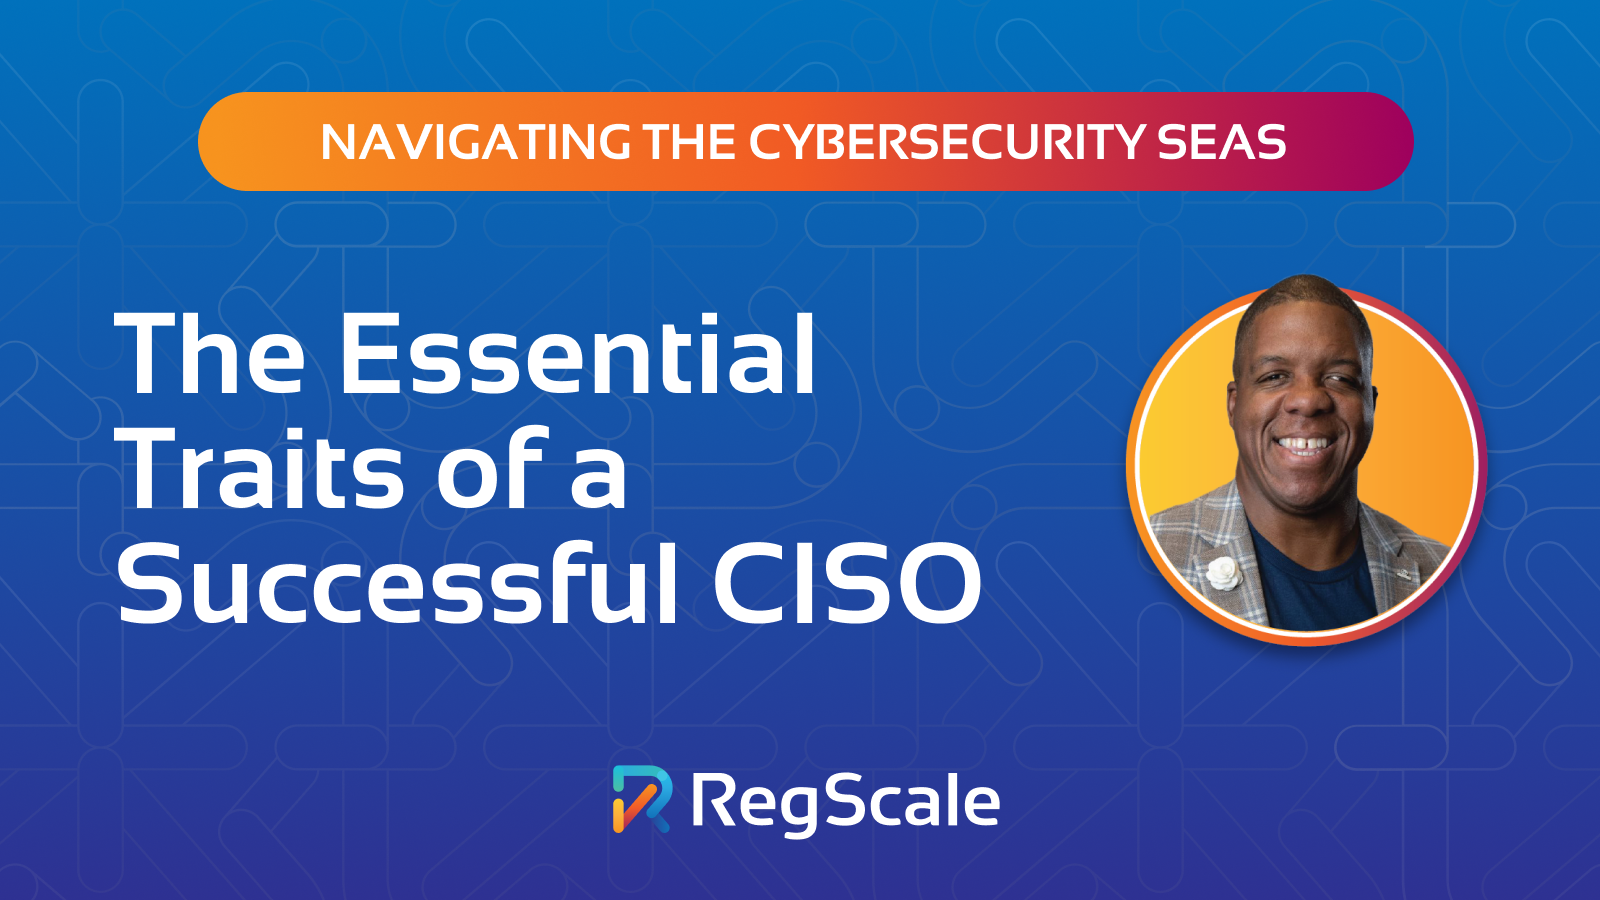 The Essential Traits of a Successful CISO